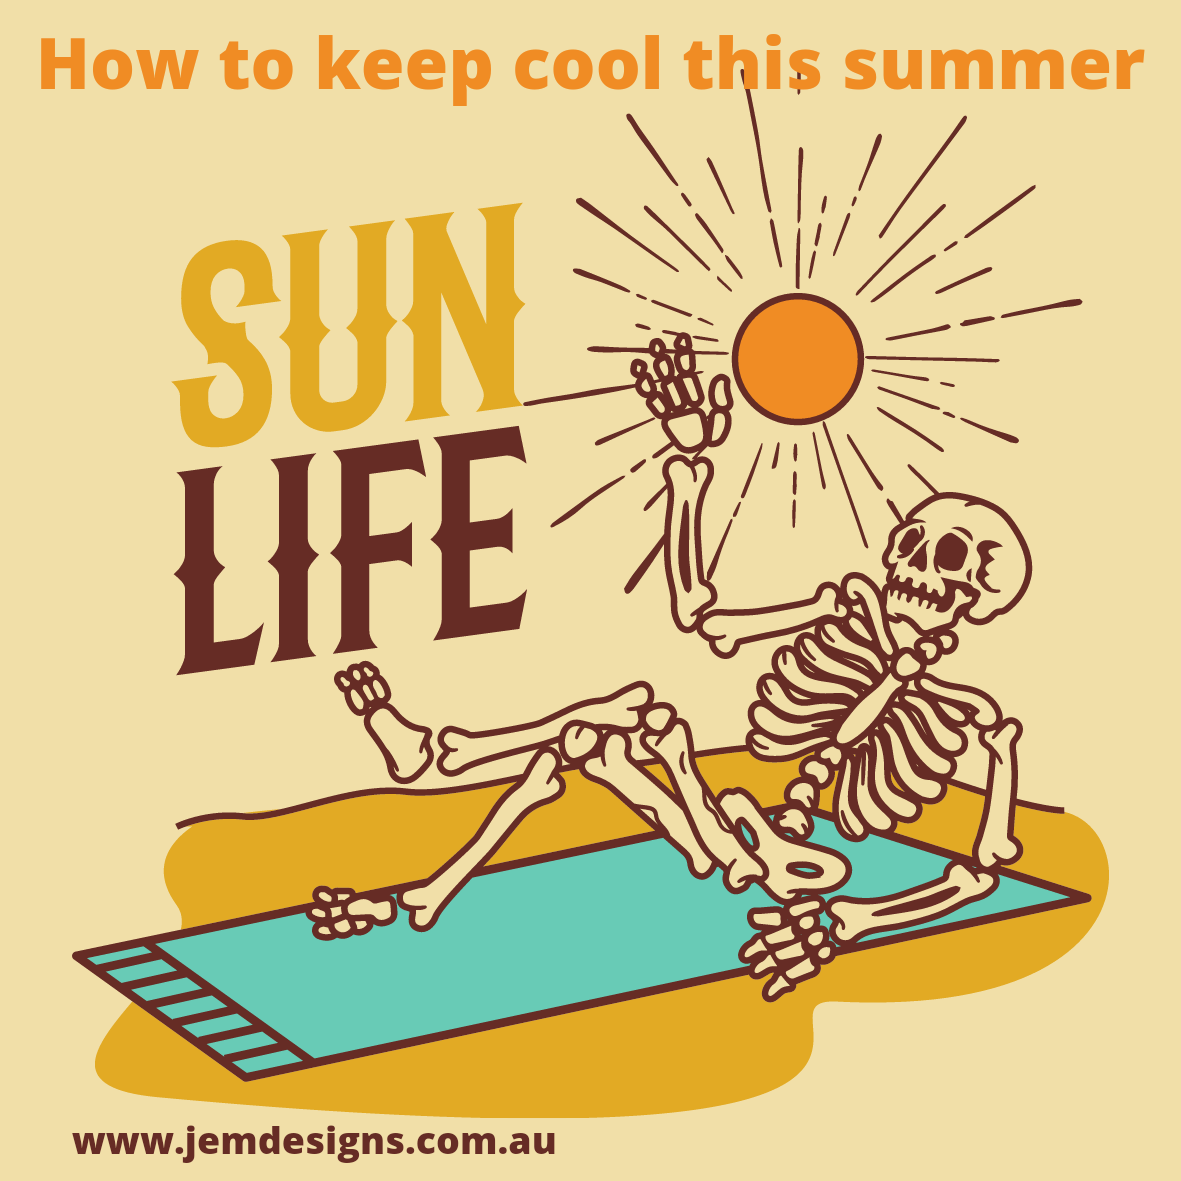 ITS SUMMER……… HOW TO PLAN TO KEEP COOL THIS SUMMER  – AND KEEP YOUR BILLS DOWN